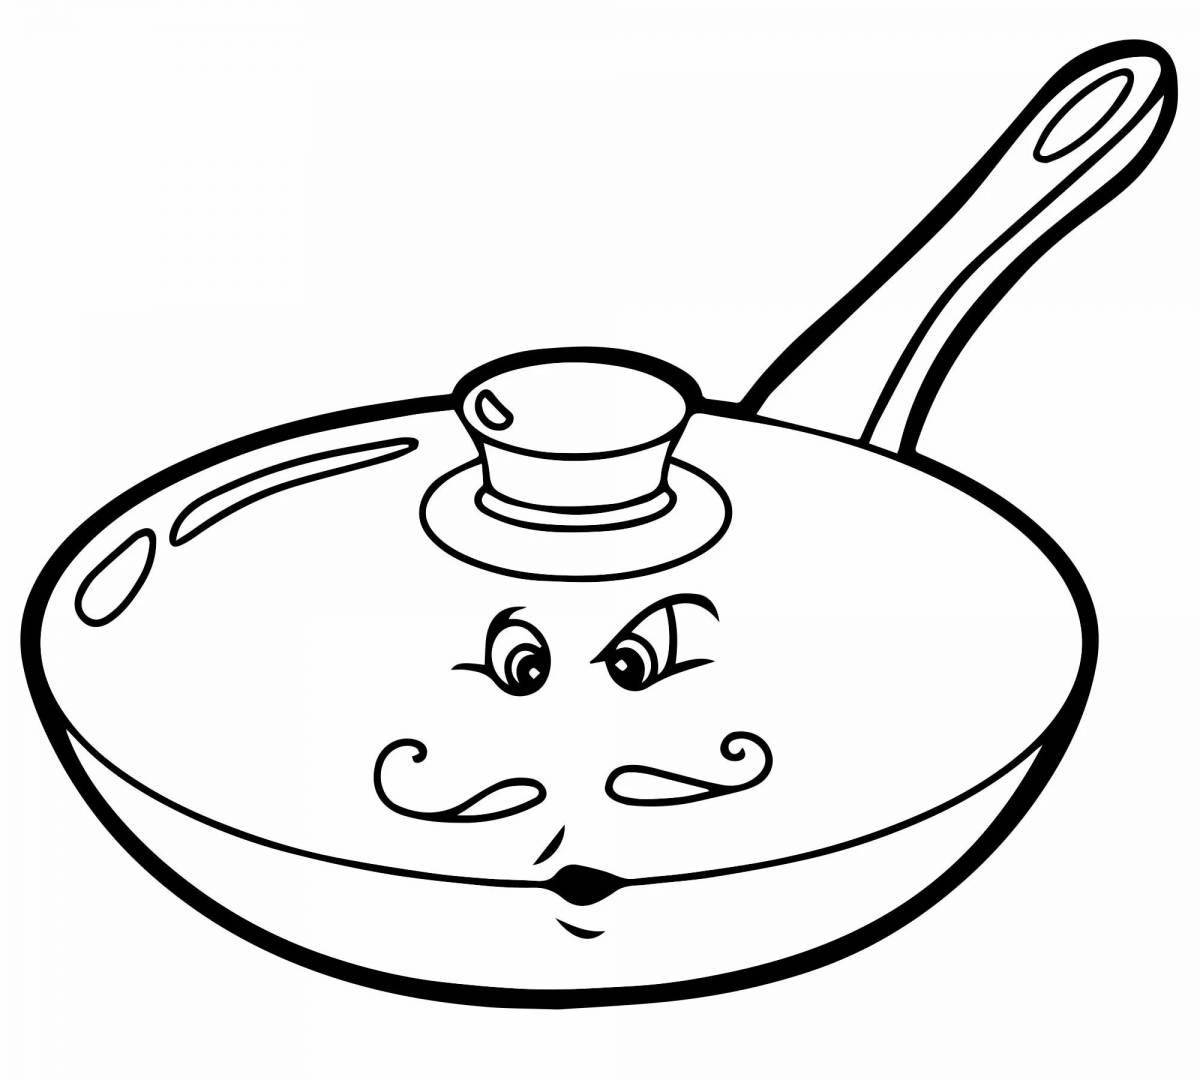 Cute saucepan coloring book for 3-4 year olds